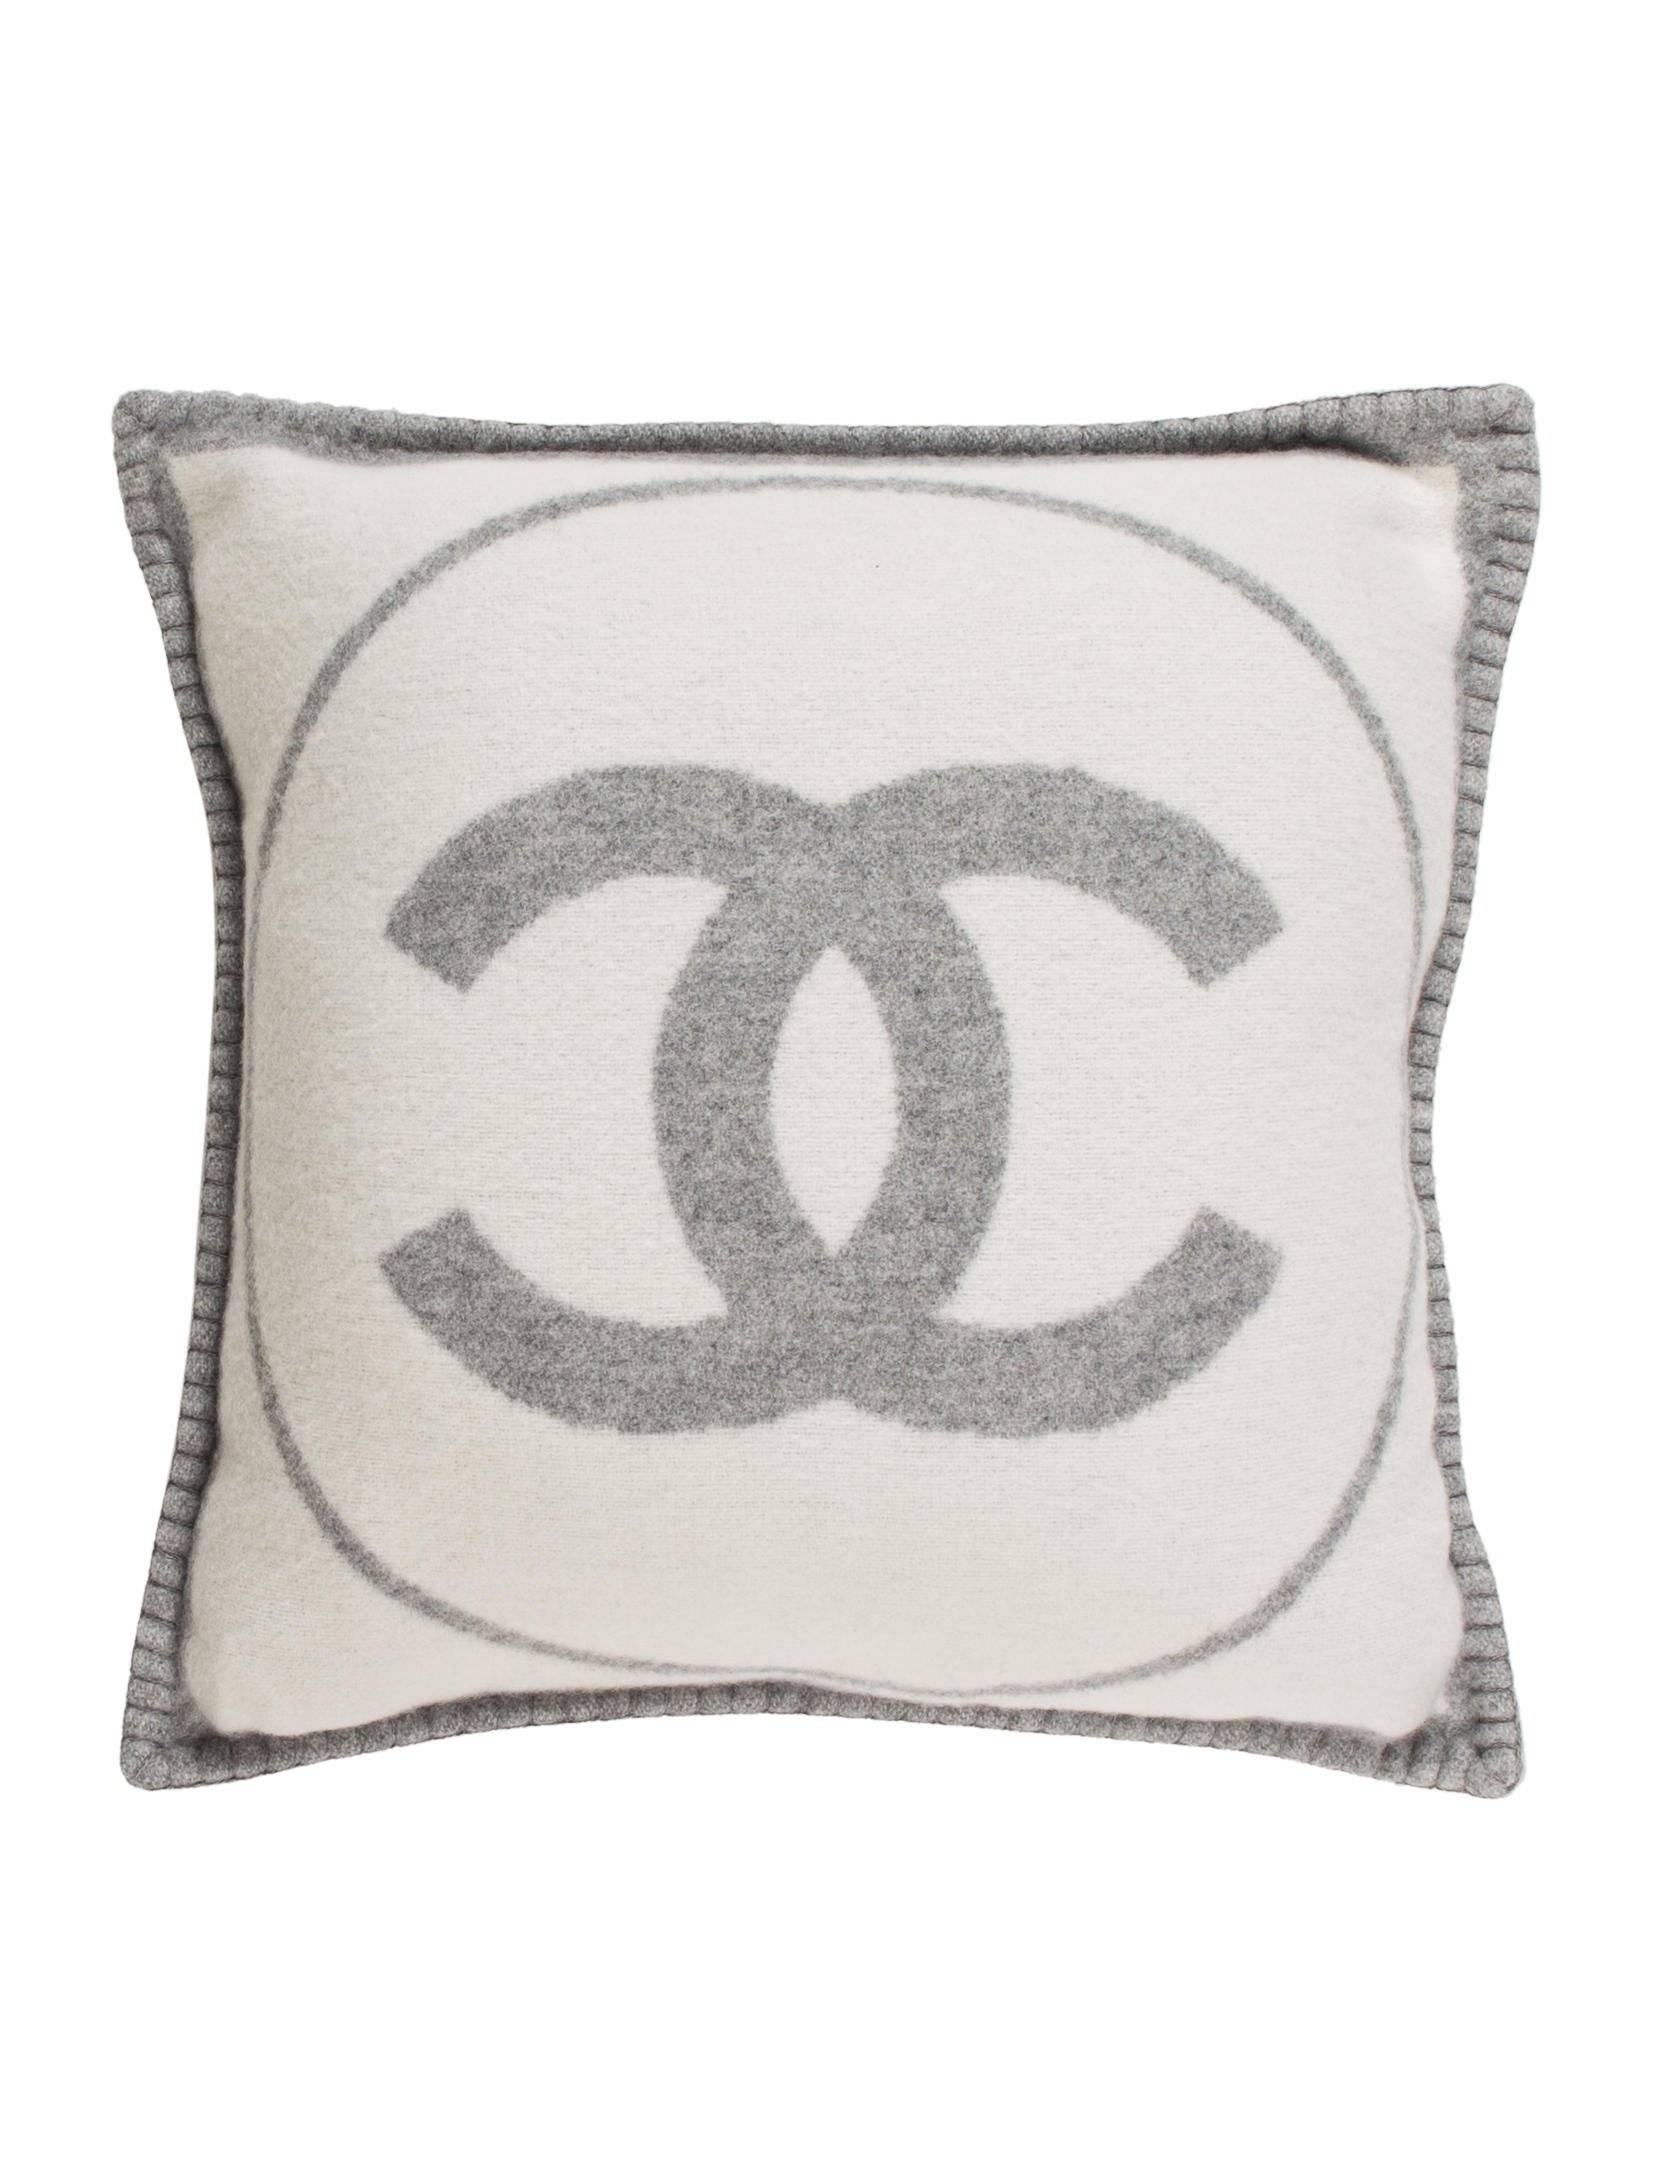 black and white chanel throw pillows